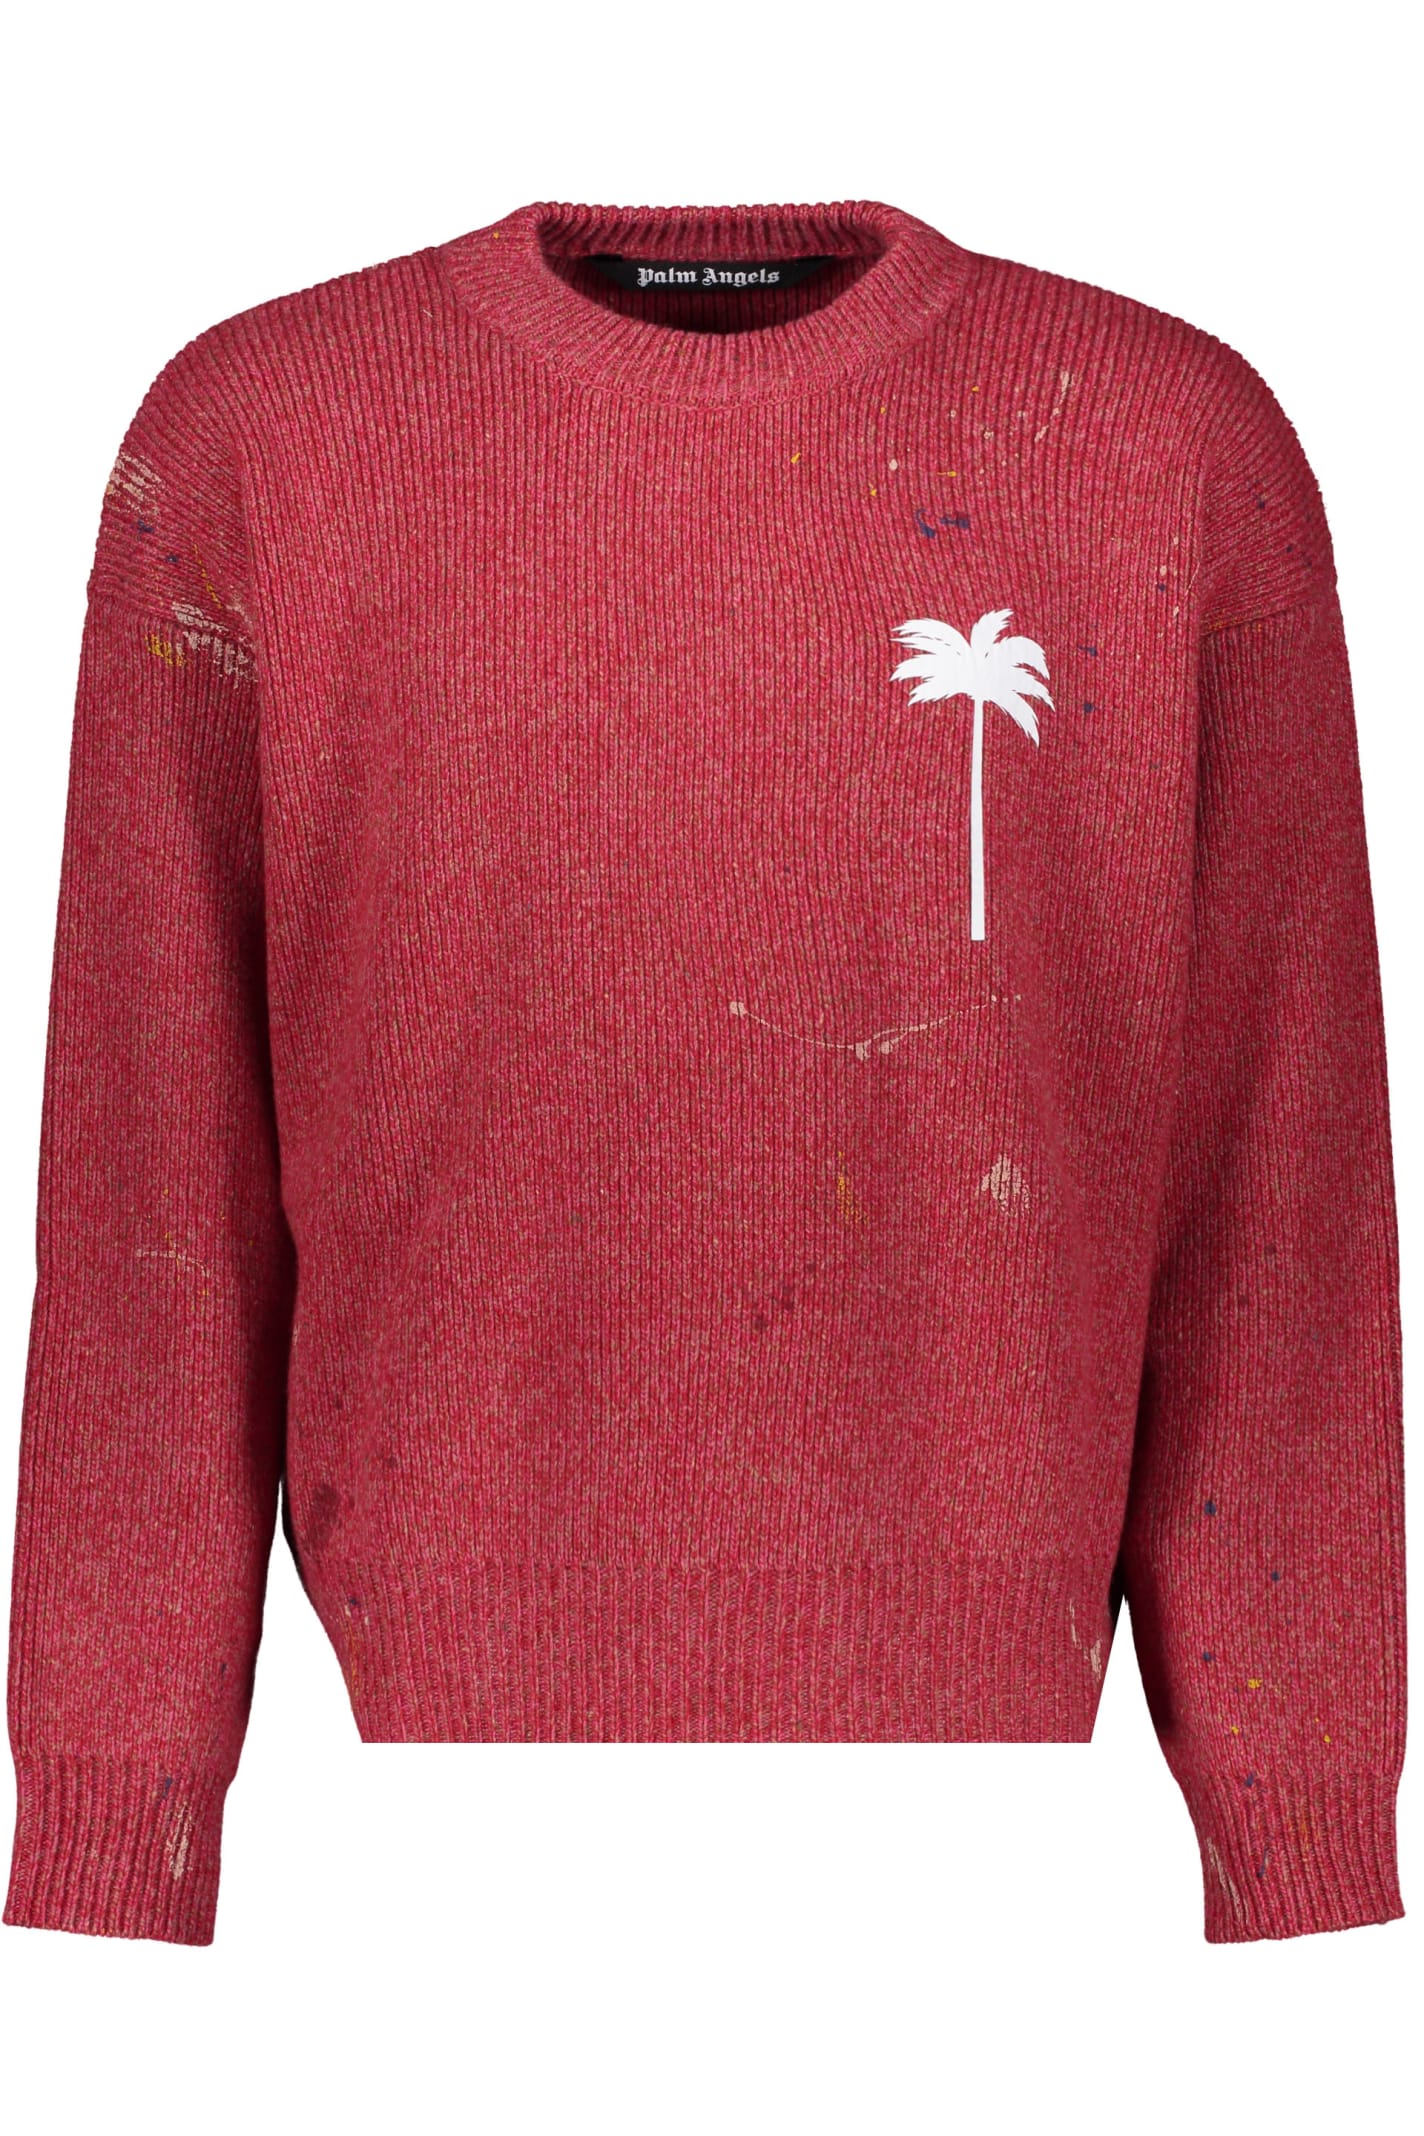 Palm Angels Long Sleeve Crew-neck Sweater